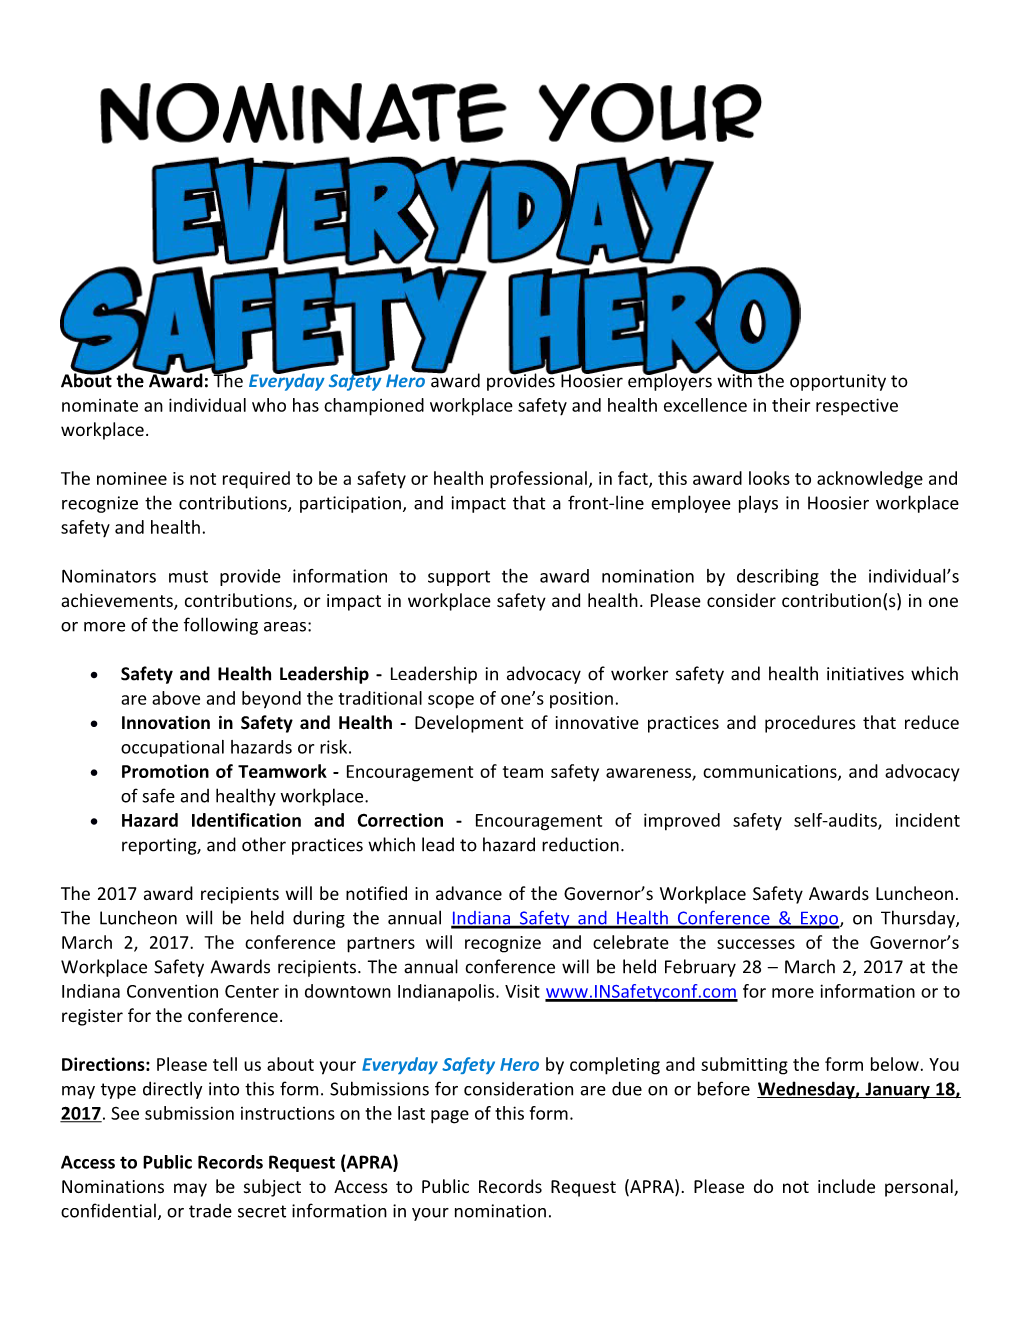 About the Award: the Everyday Safety Hero Award Provides Hoosier Employers with the Opportunity